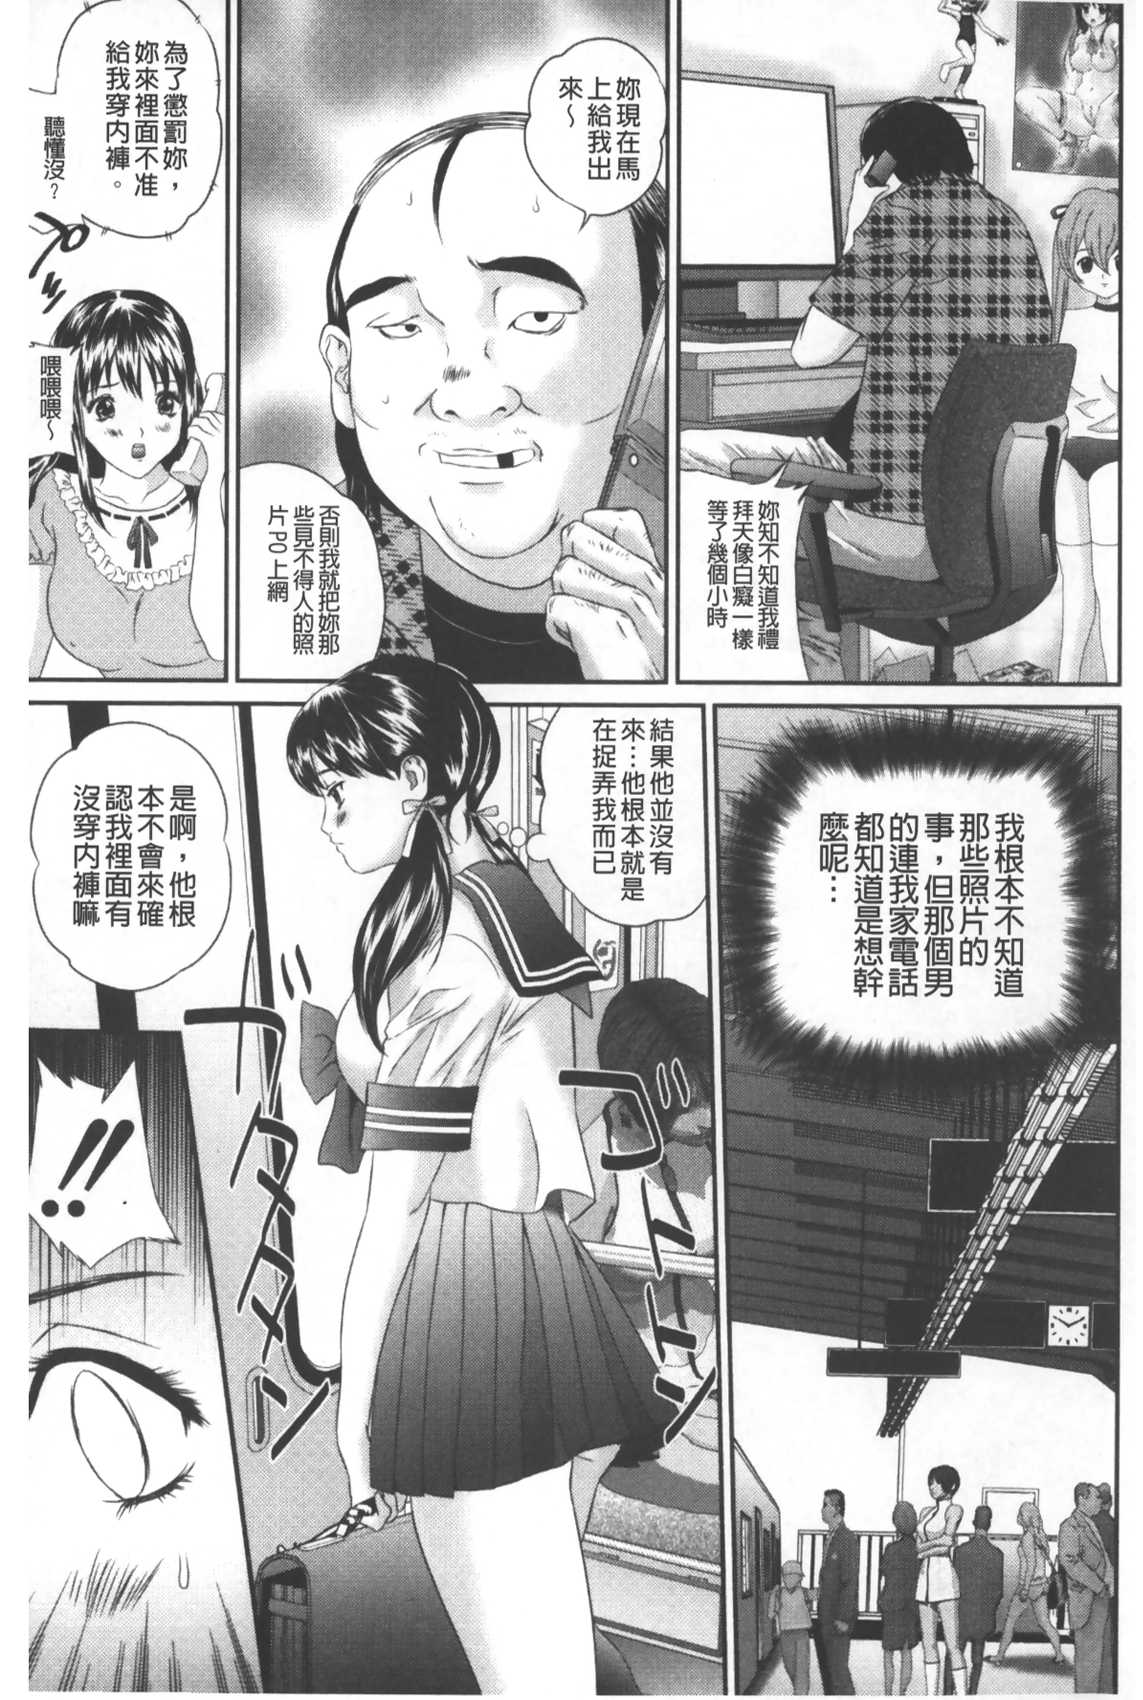 [Manzou] Tousatsu Collector | 盜拍題材精選集 [Chinese] page 8 full